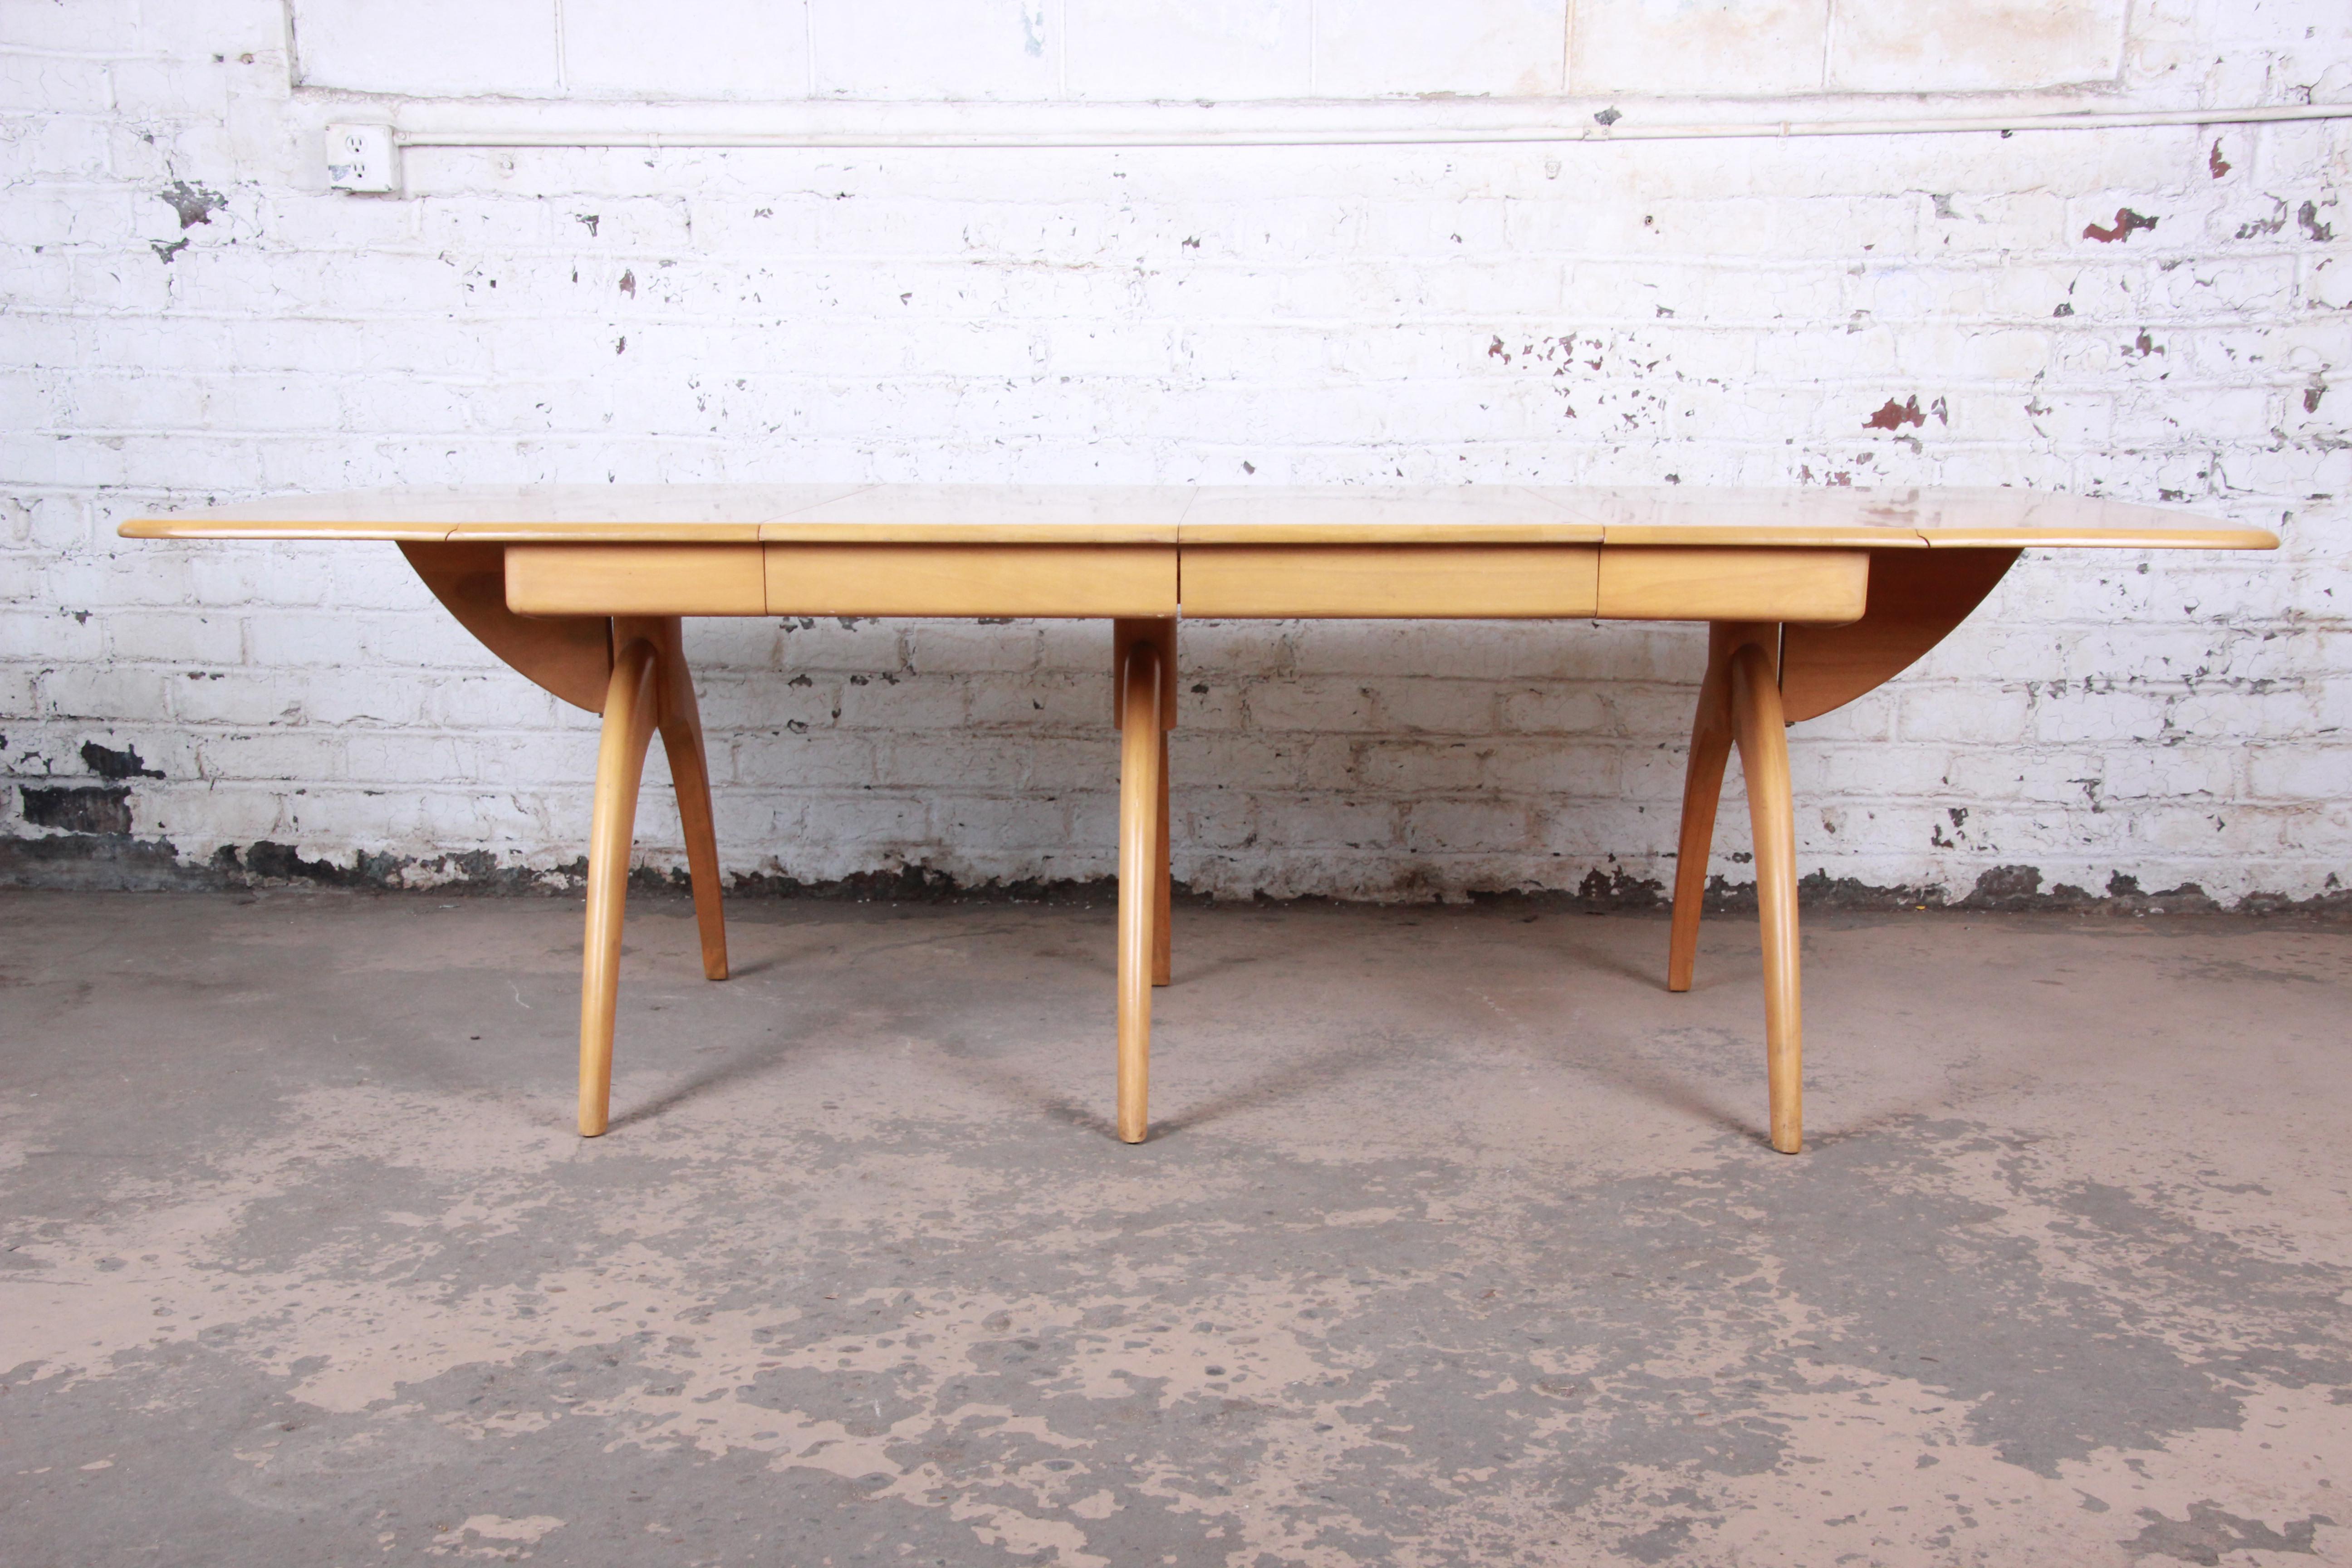 A gorgeous Mid-Century Modern extension drop-leaf wishbone dining table by Heywood-Wakefield. The table is well constructed from solid maple and features sculpted 